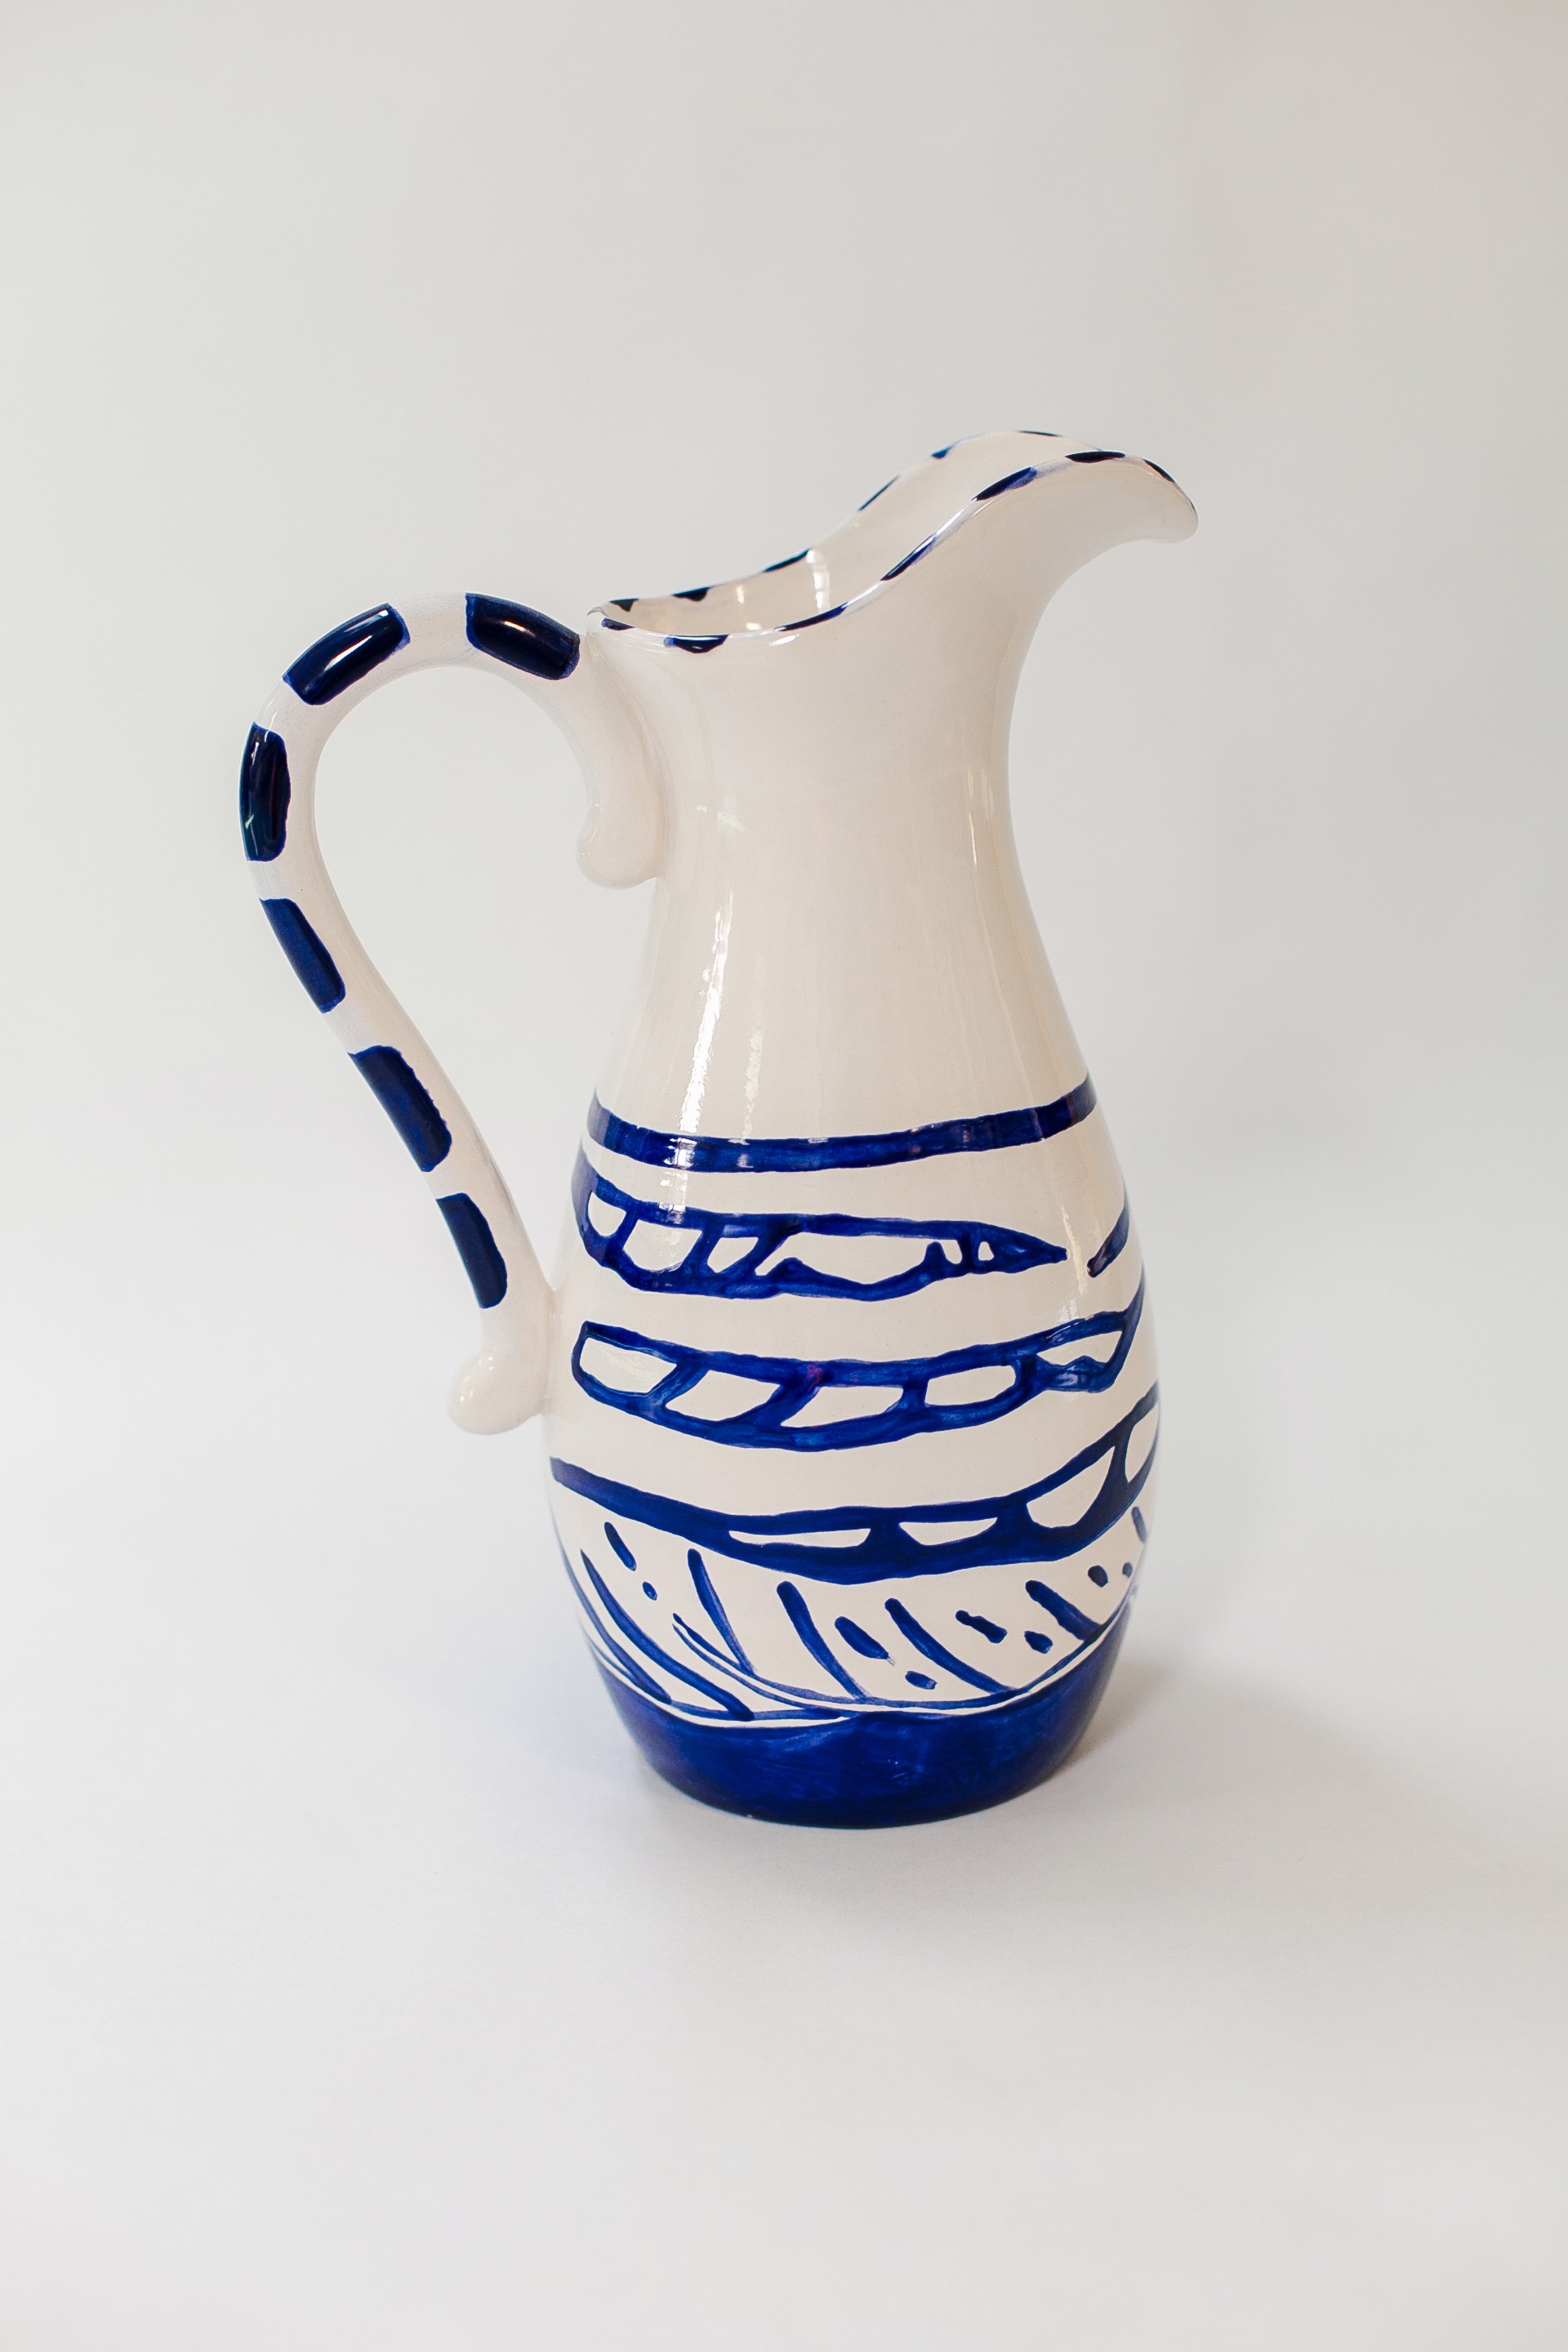 Blue Moon Pitcher by Andrea Naylor